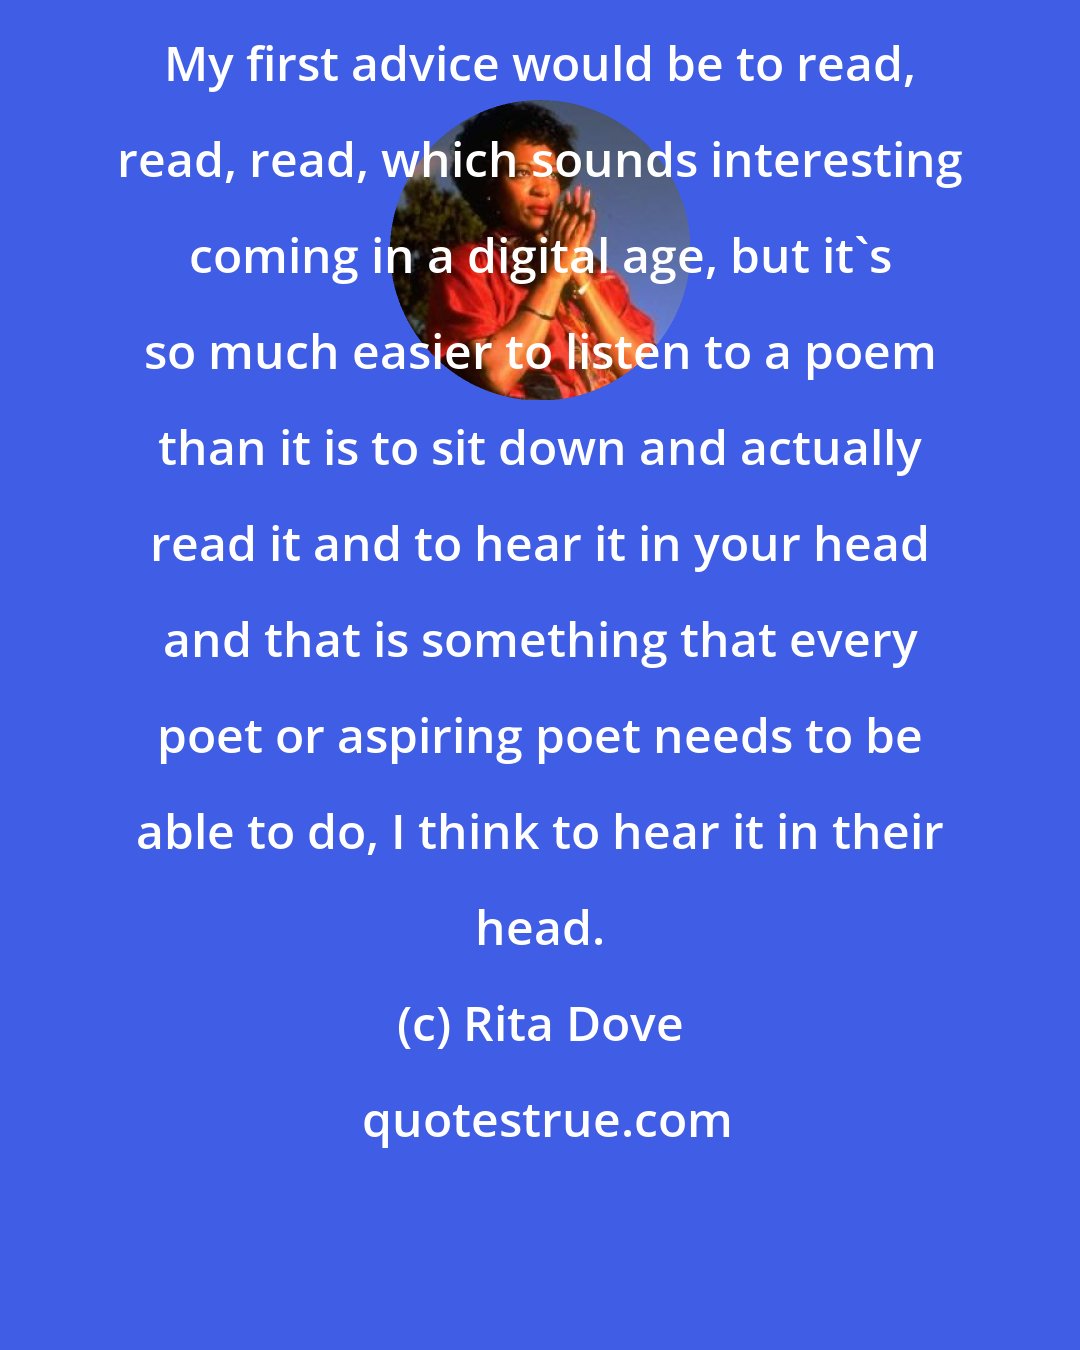 Rita Dove: My first advice would be to read, read, read, which sounds interesting coming in a digital age, but it's so much easier to listen to a poem than it is to sit down and actually read it and to hear it in your head and that is something that every poet or aspiring poet needs to be able to do, I think to hear it in their head.